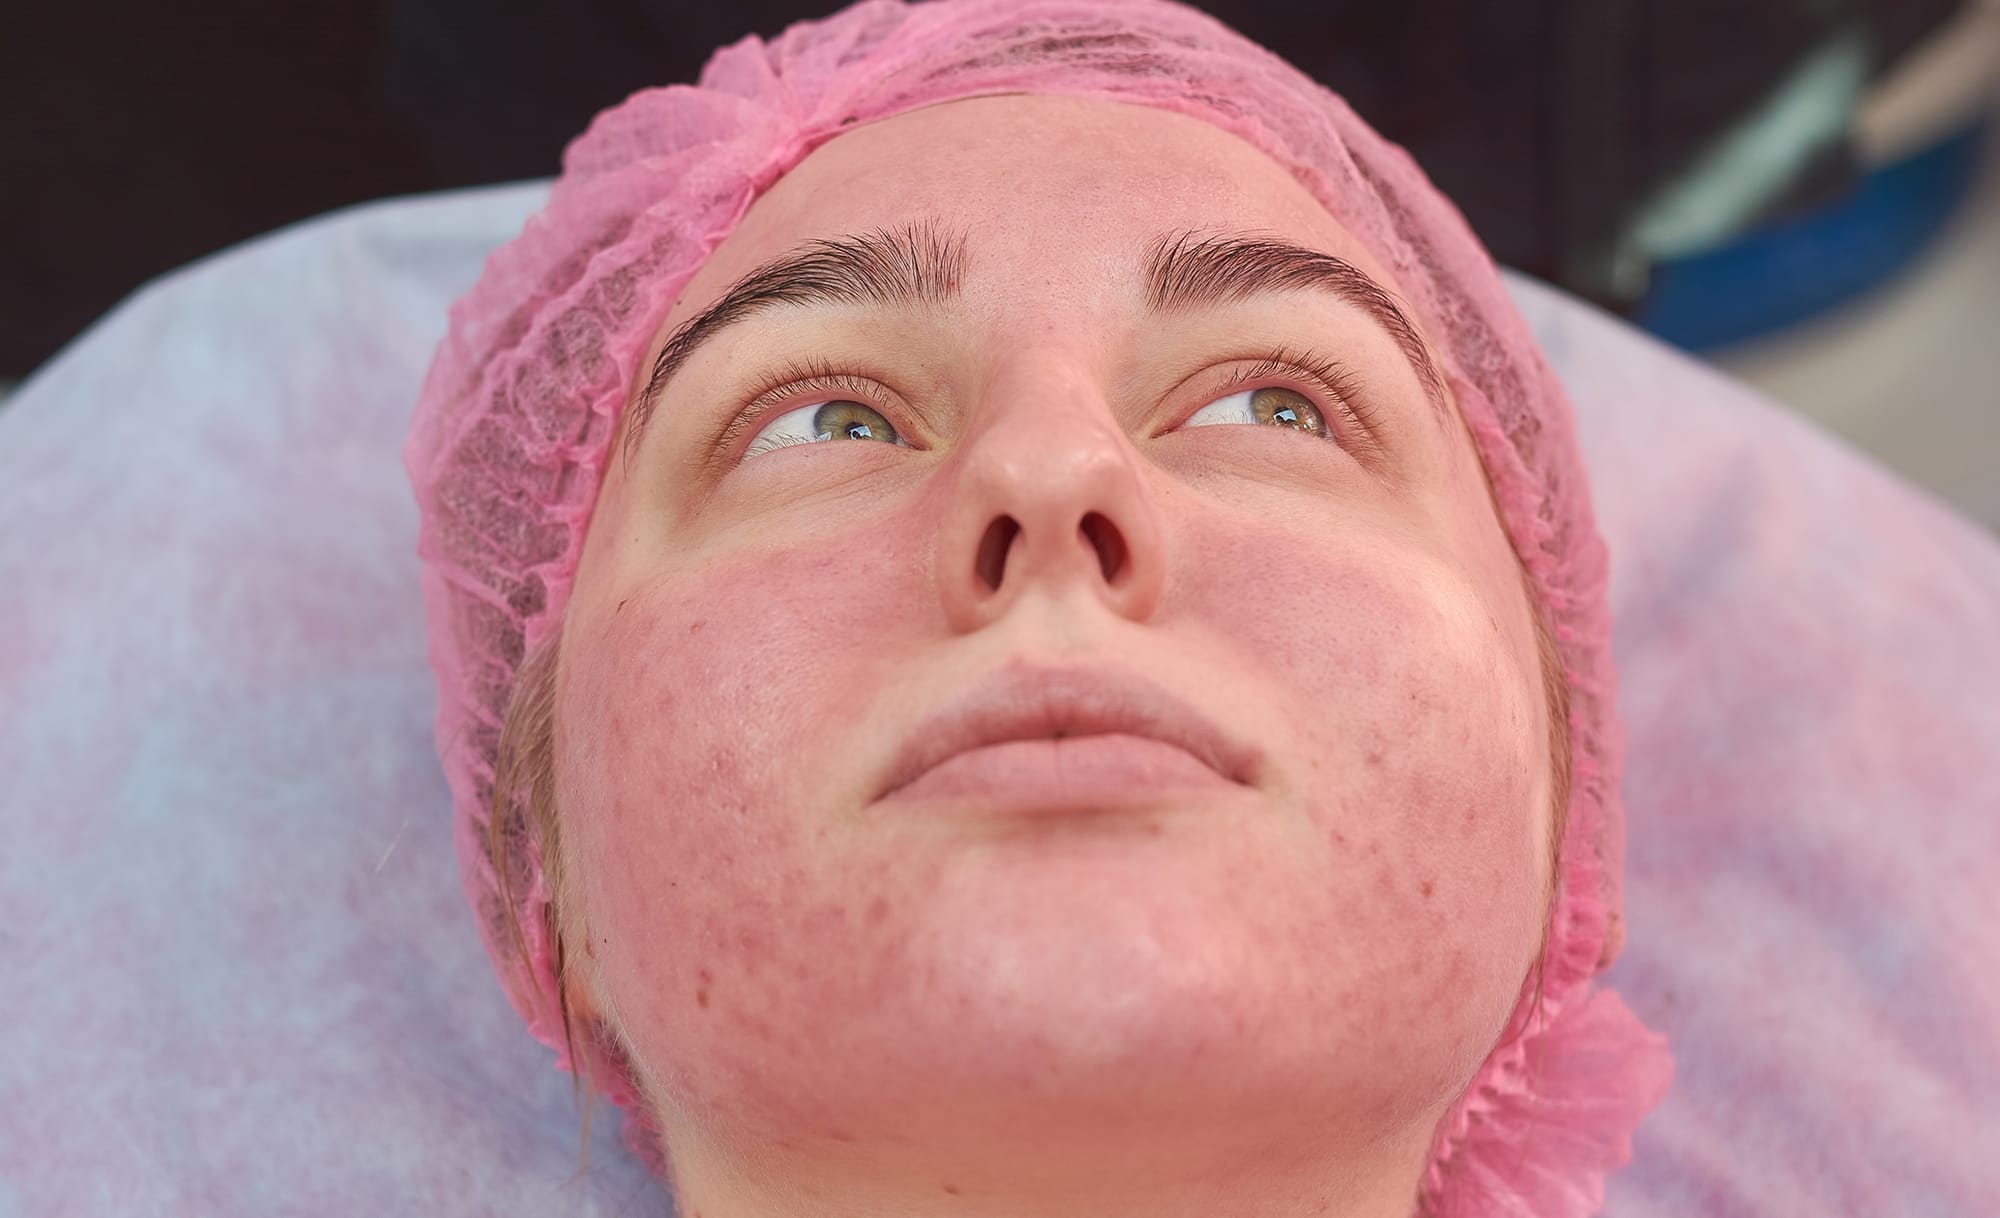 What Light Therapy Is Best for Rosacea?